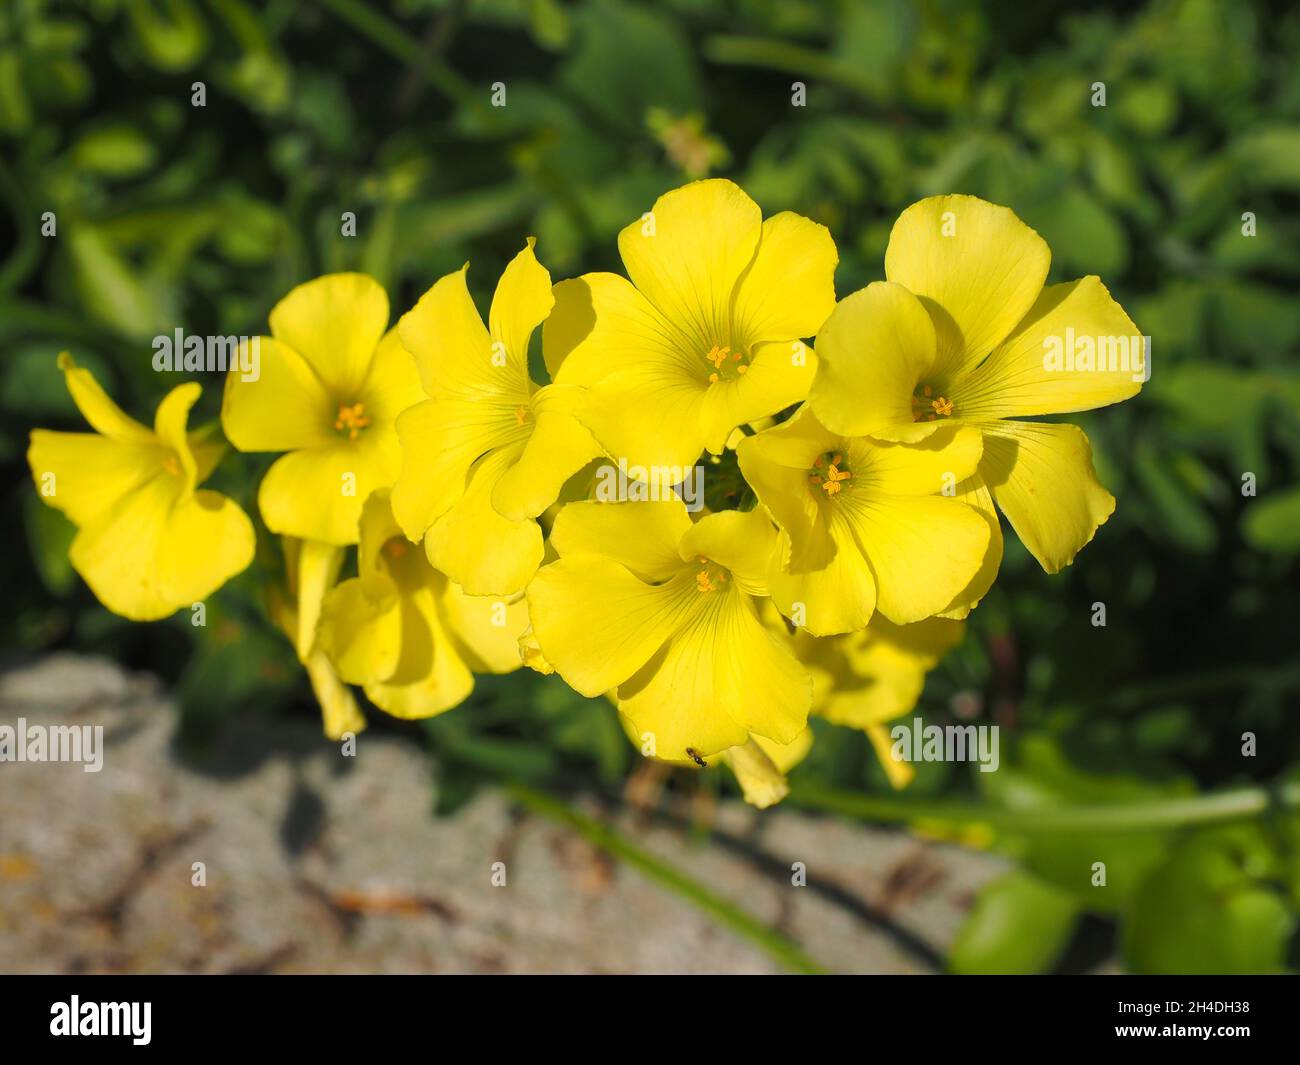 Yellow Oxalis pes-caprae, Bermuda buttercup or African wood-sorrel flowers. Buttercup oxalis is tristylous flowering plant, sorrel family Oxalidaceae. Stock Photo